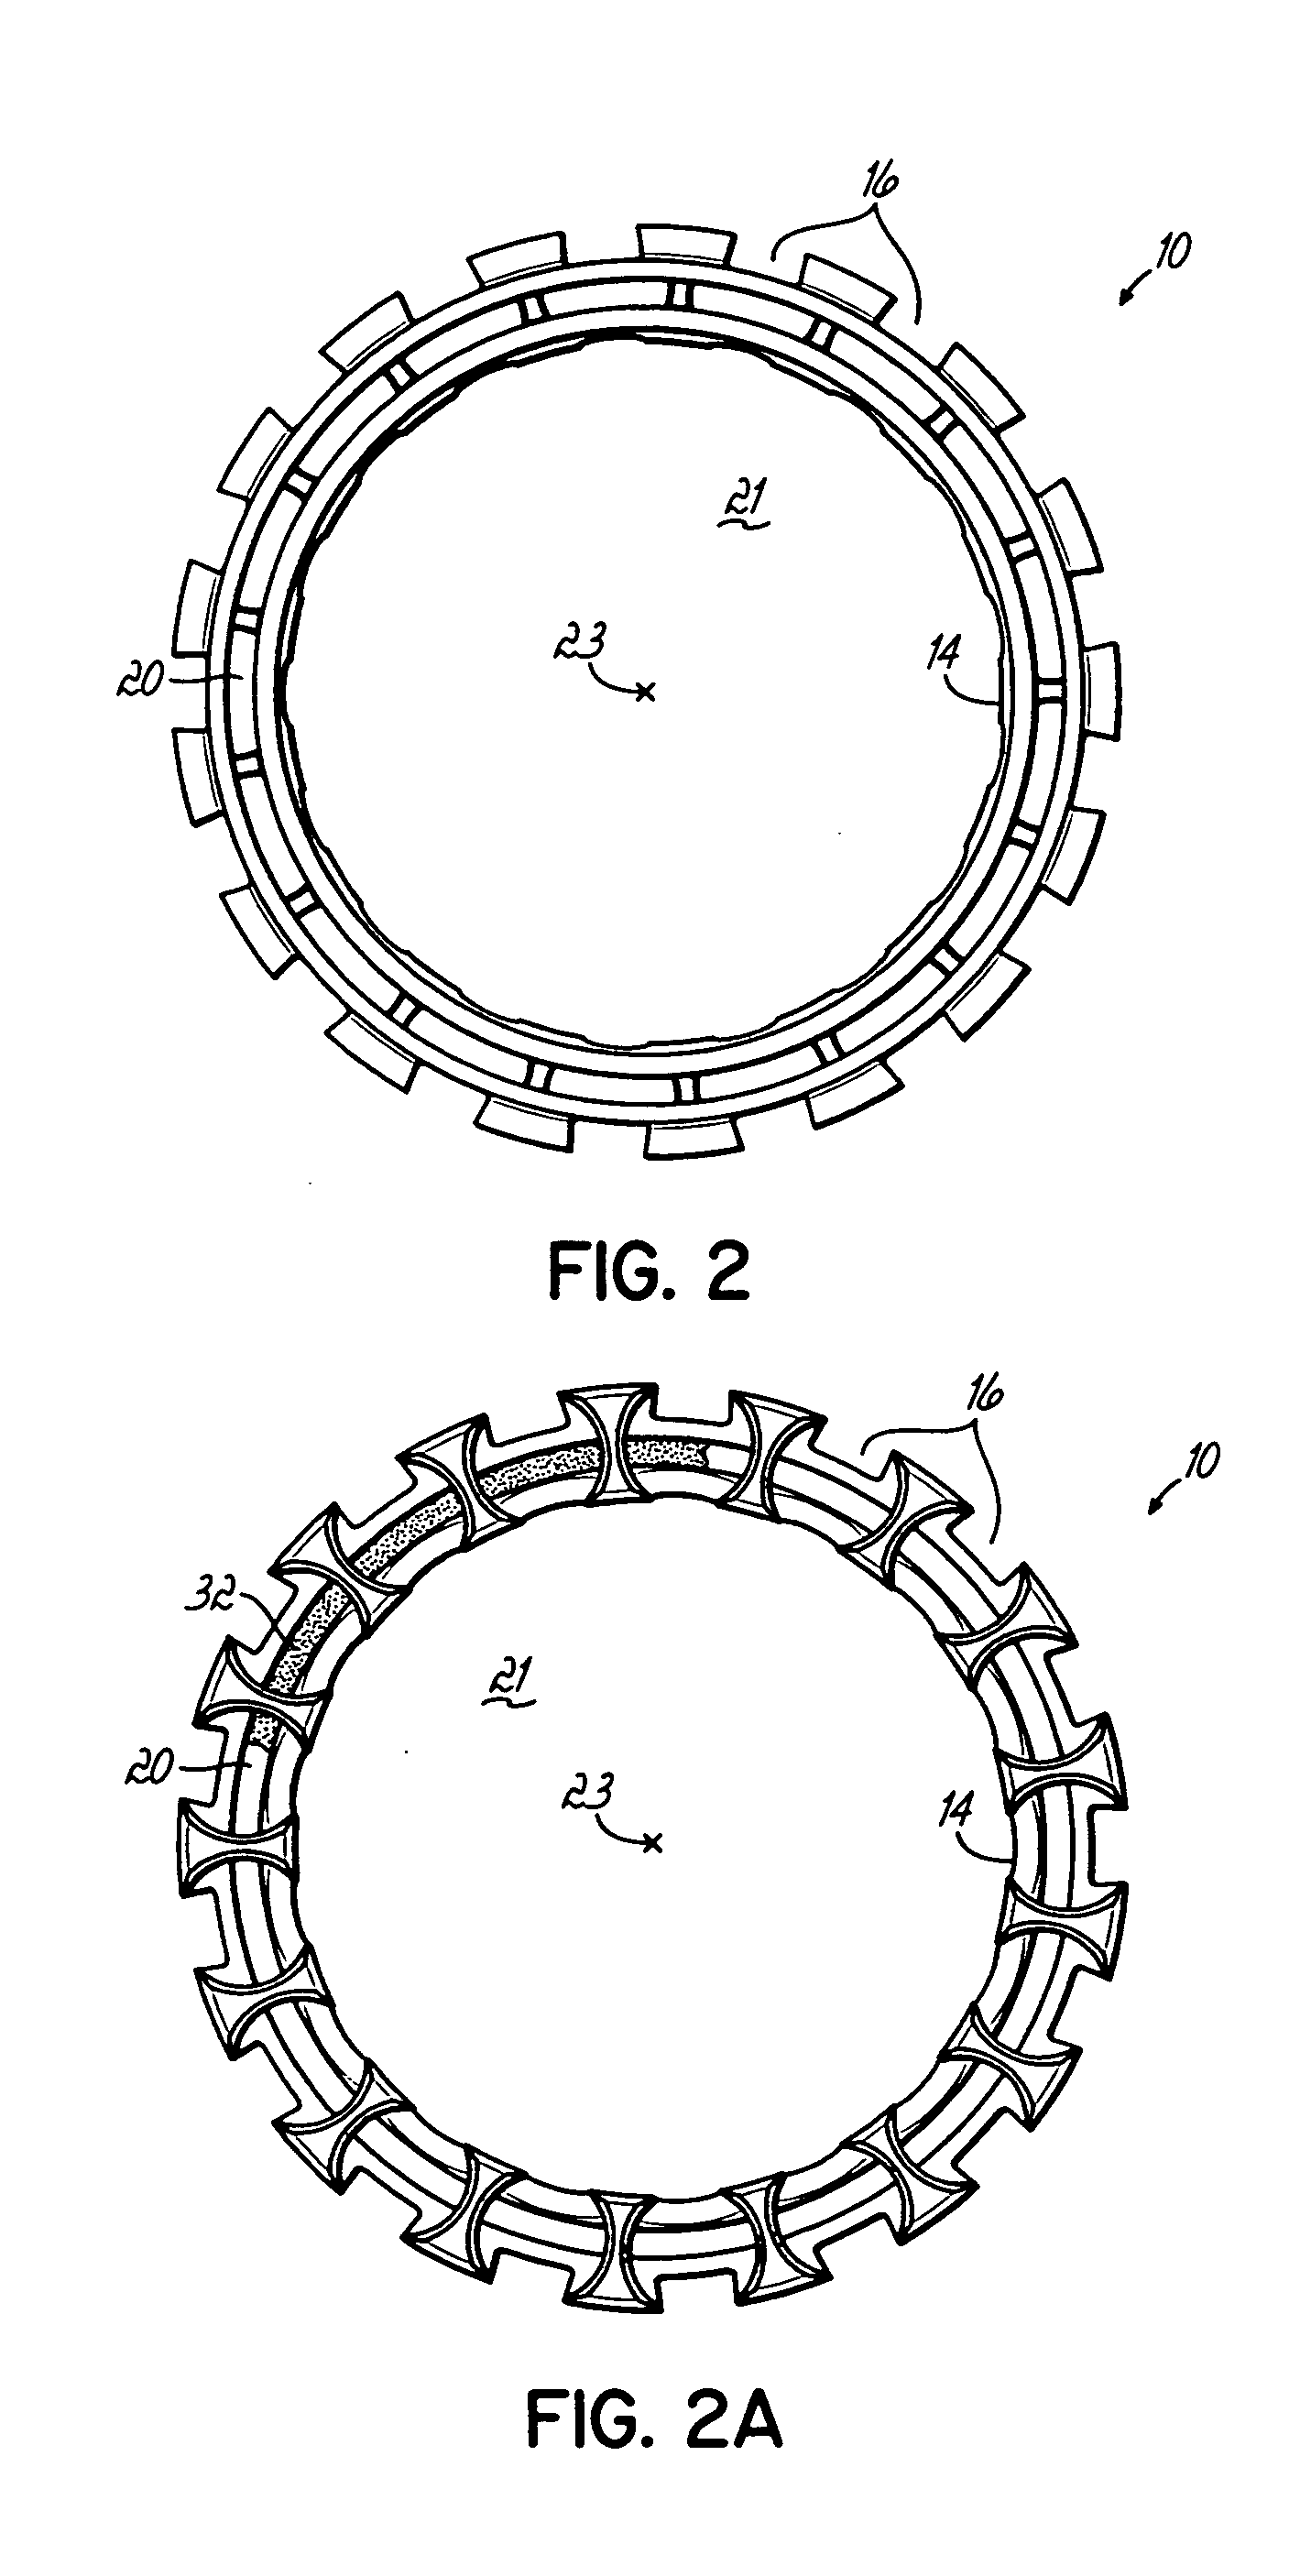 Separator grease retention and feed system for wheel spindle bearings